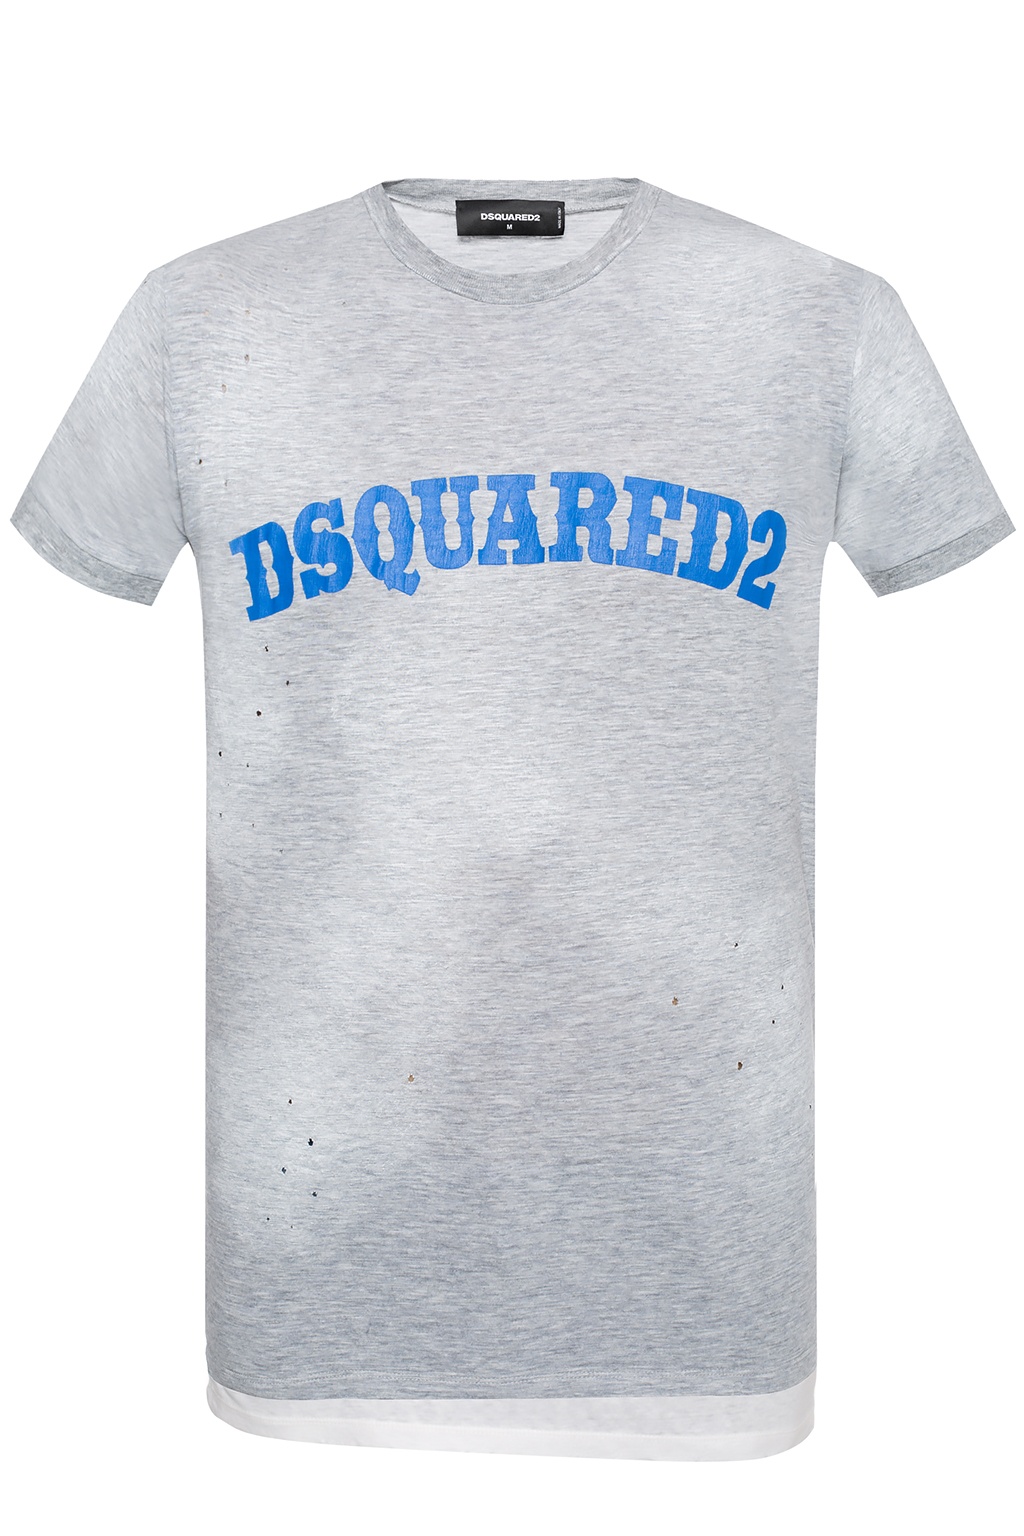 dsquared t shirt ripped